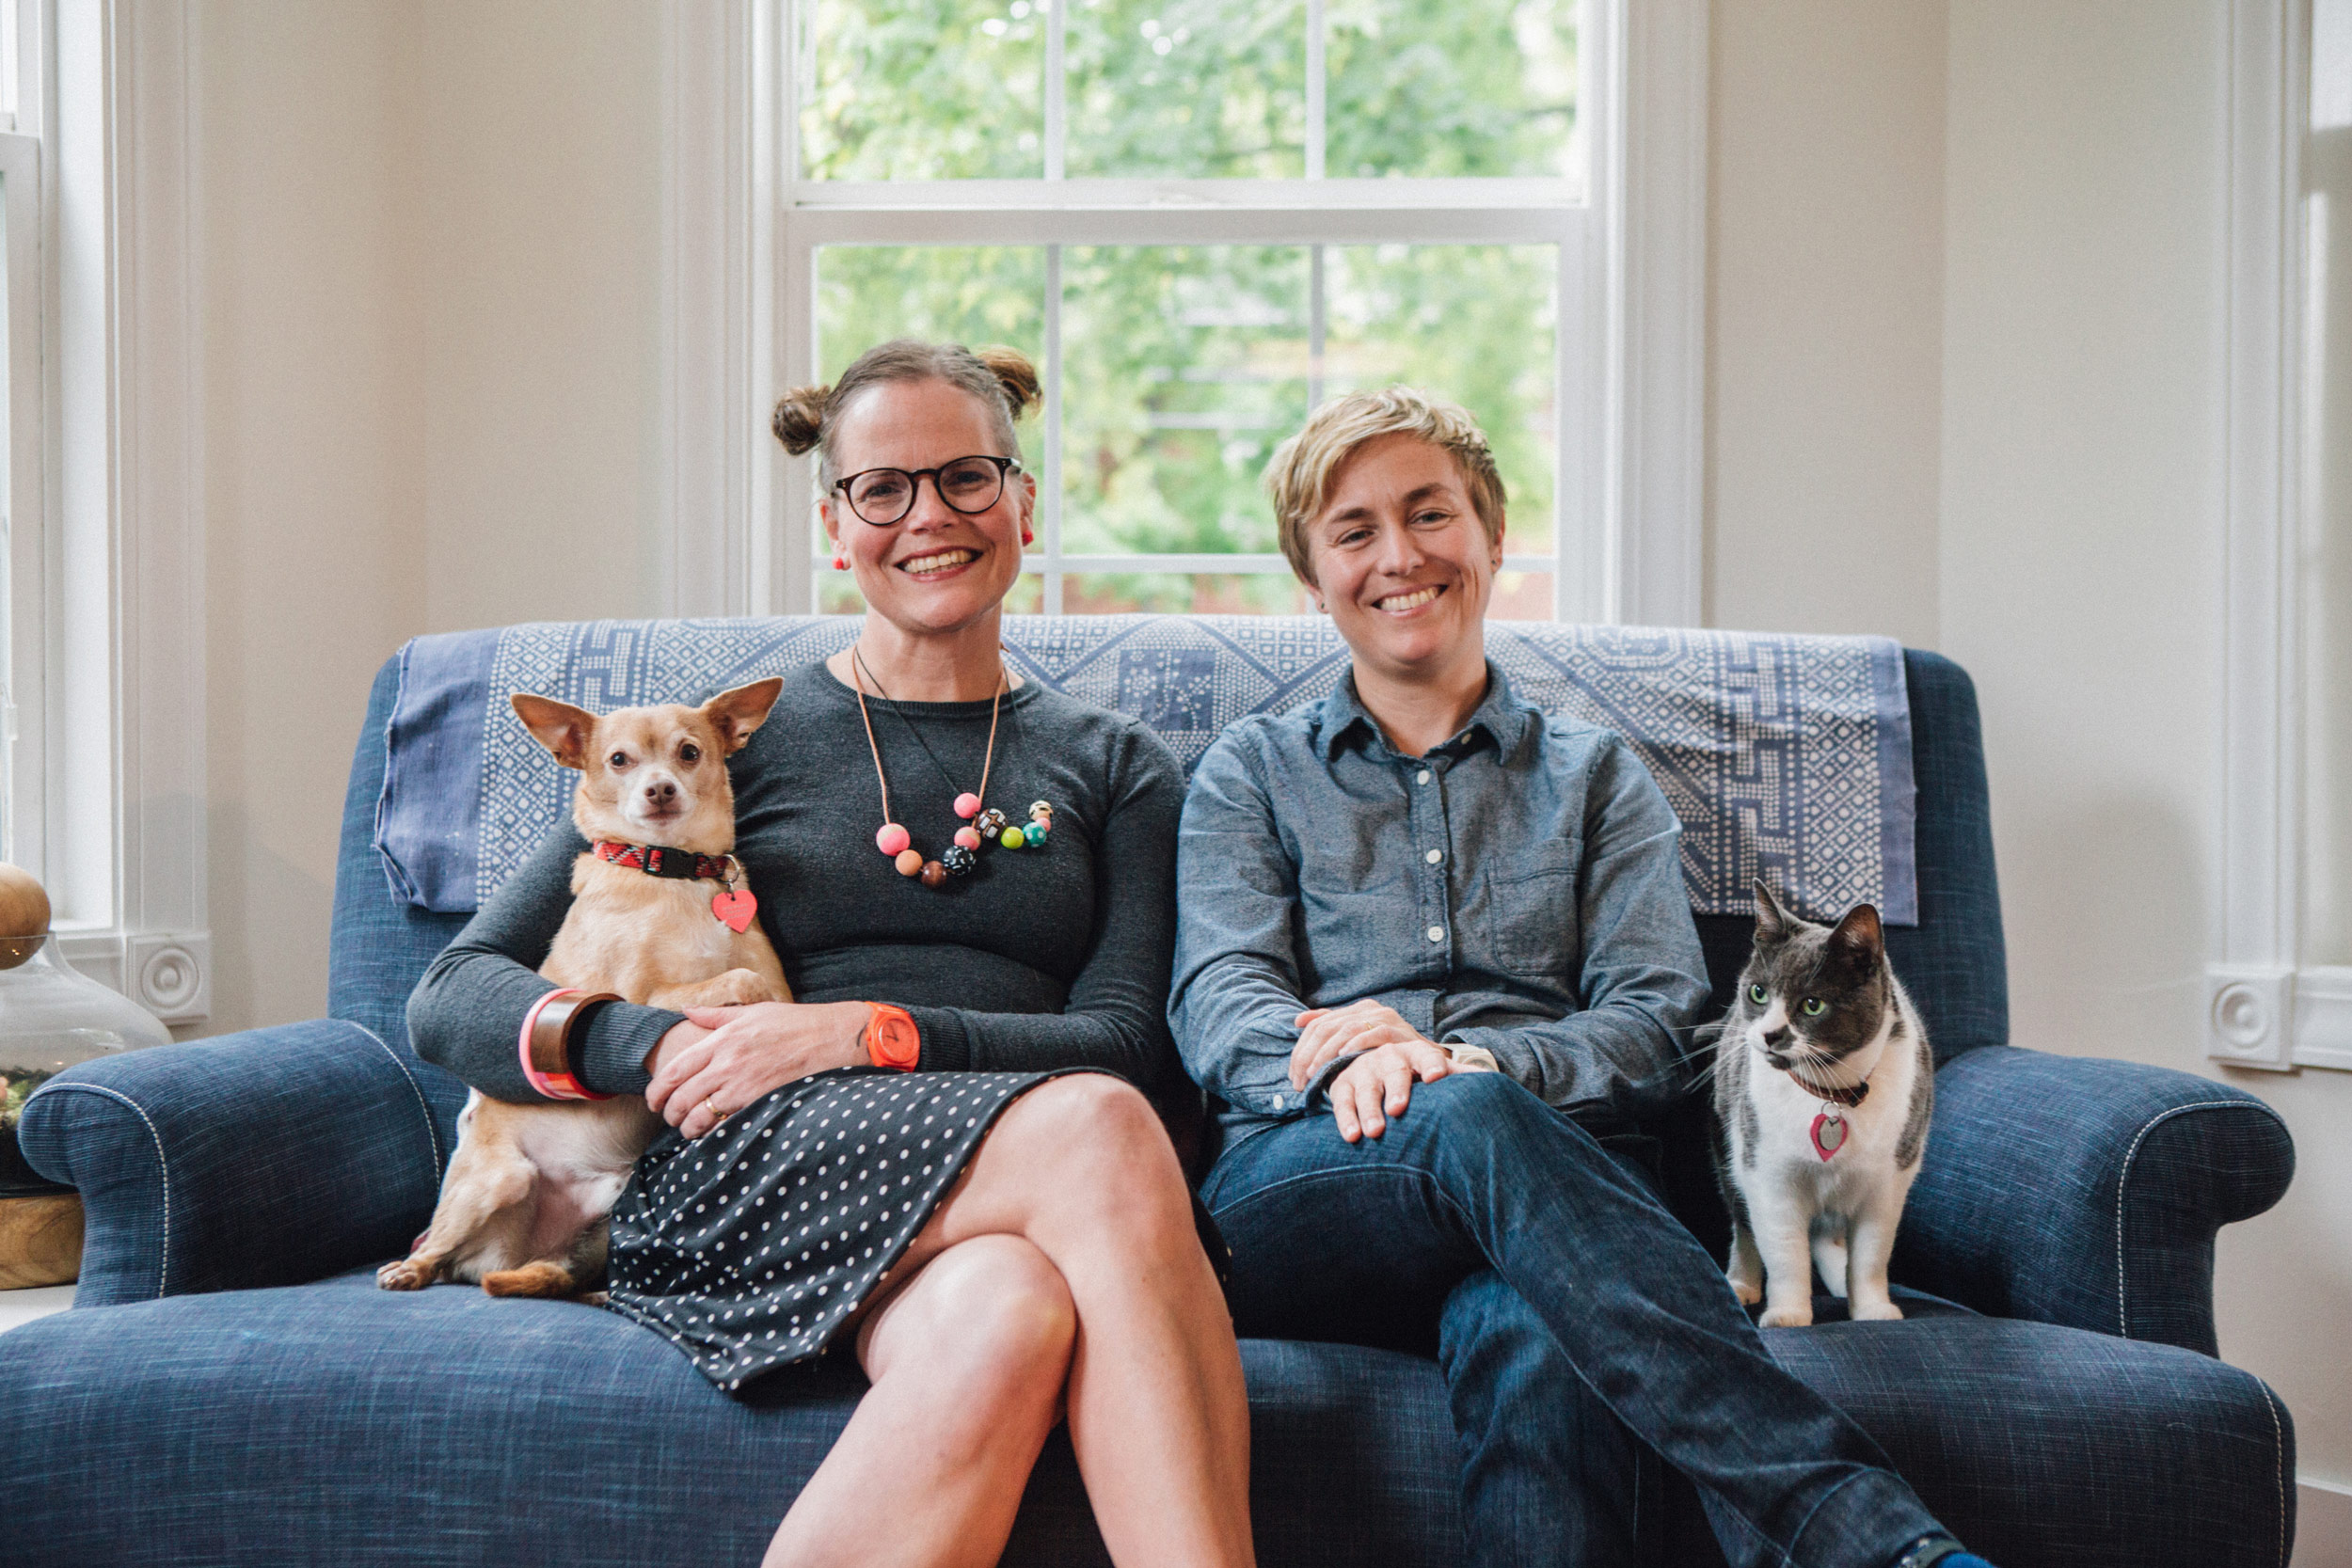 Lisa and Clay with their dog, Wilfredo, and cat, Margaret, at their home in Portland, OR